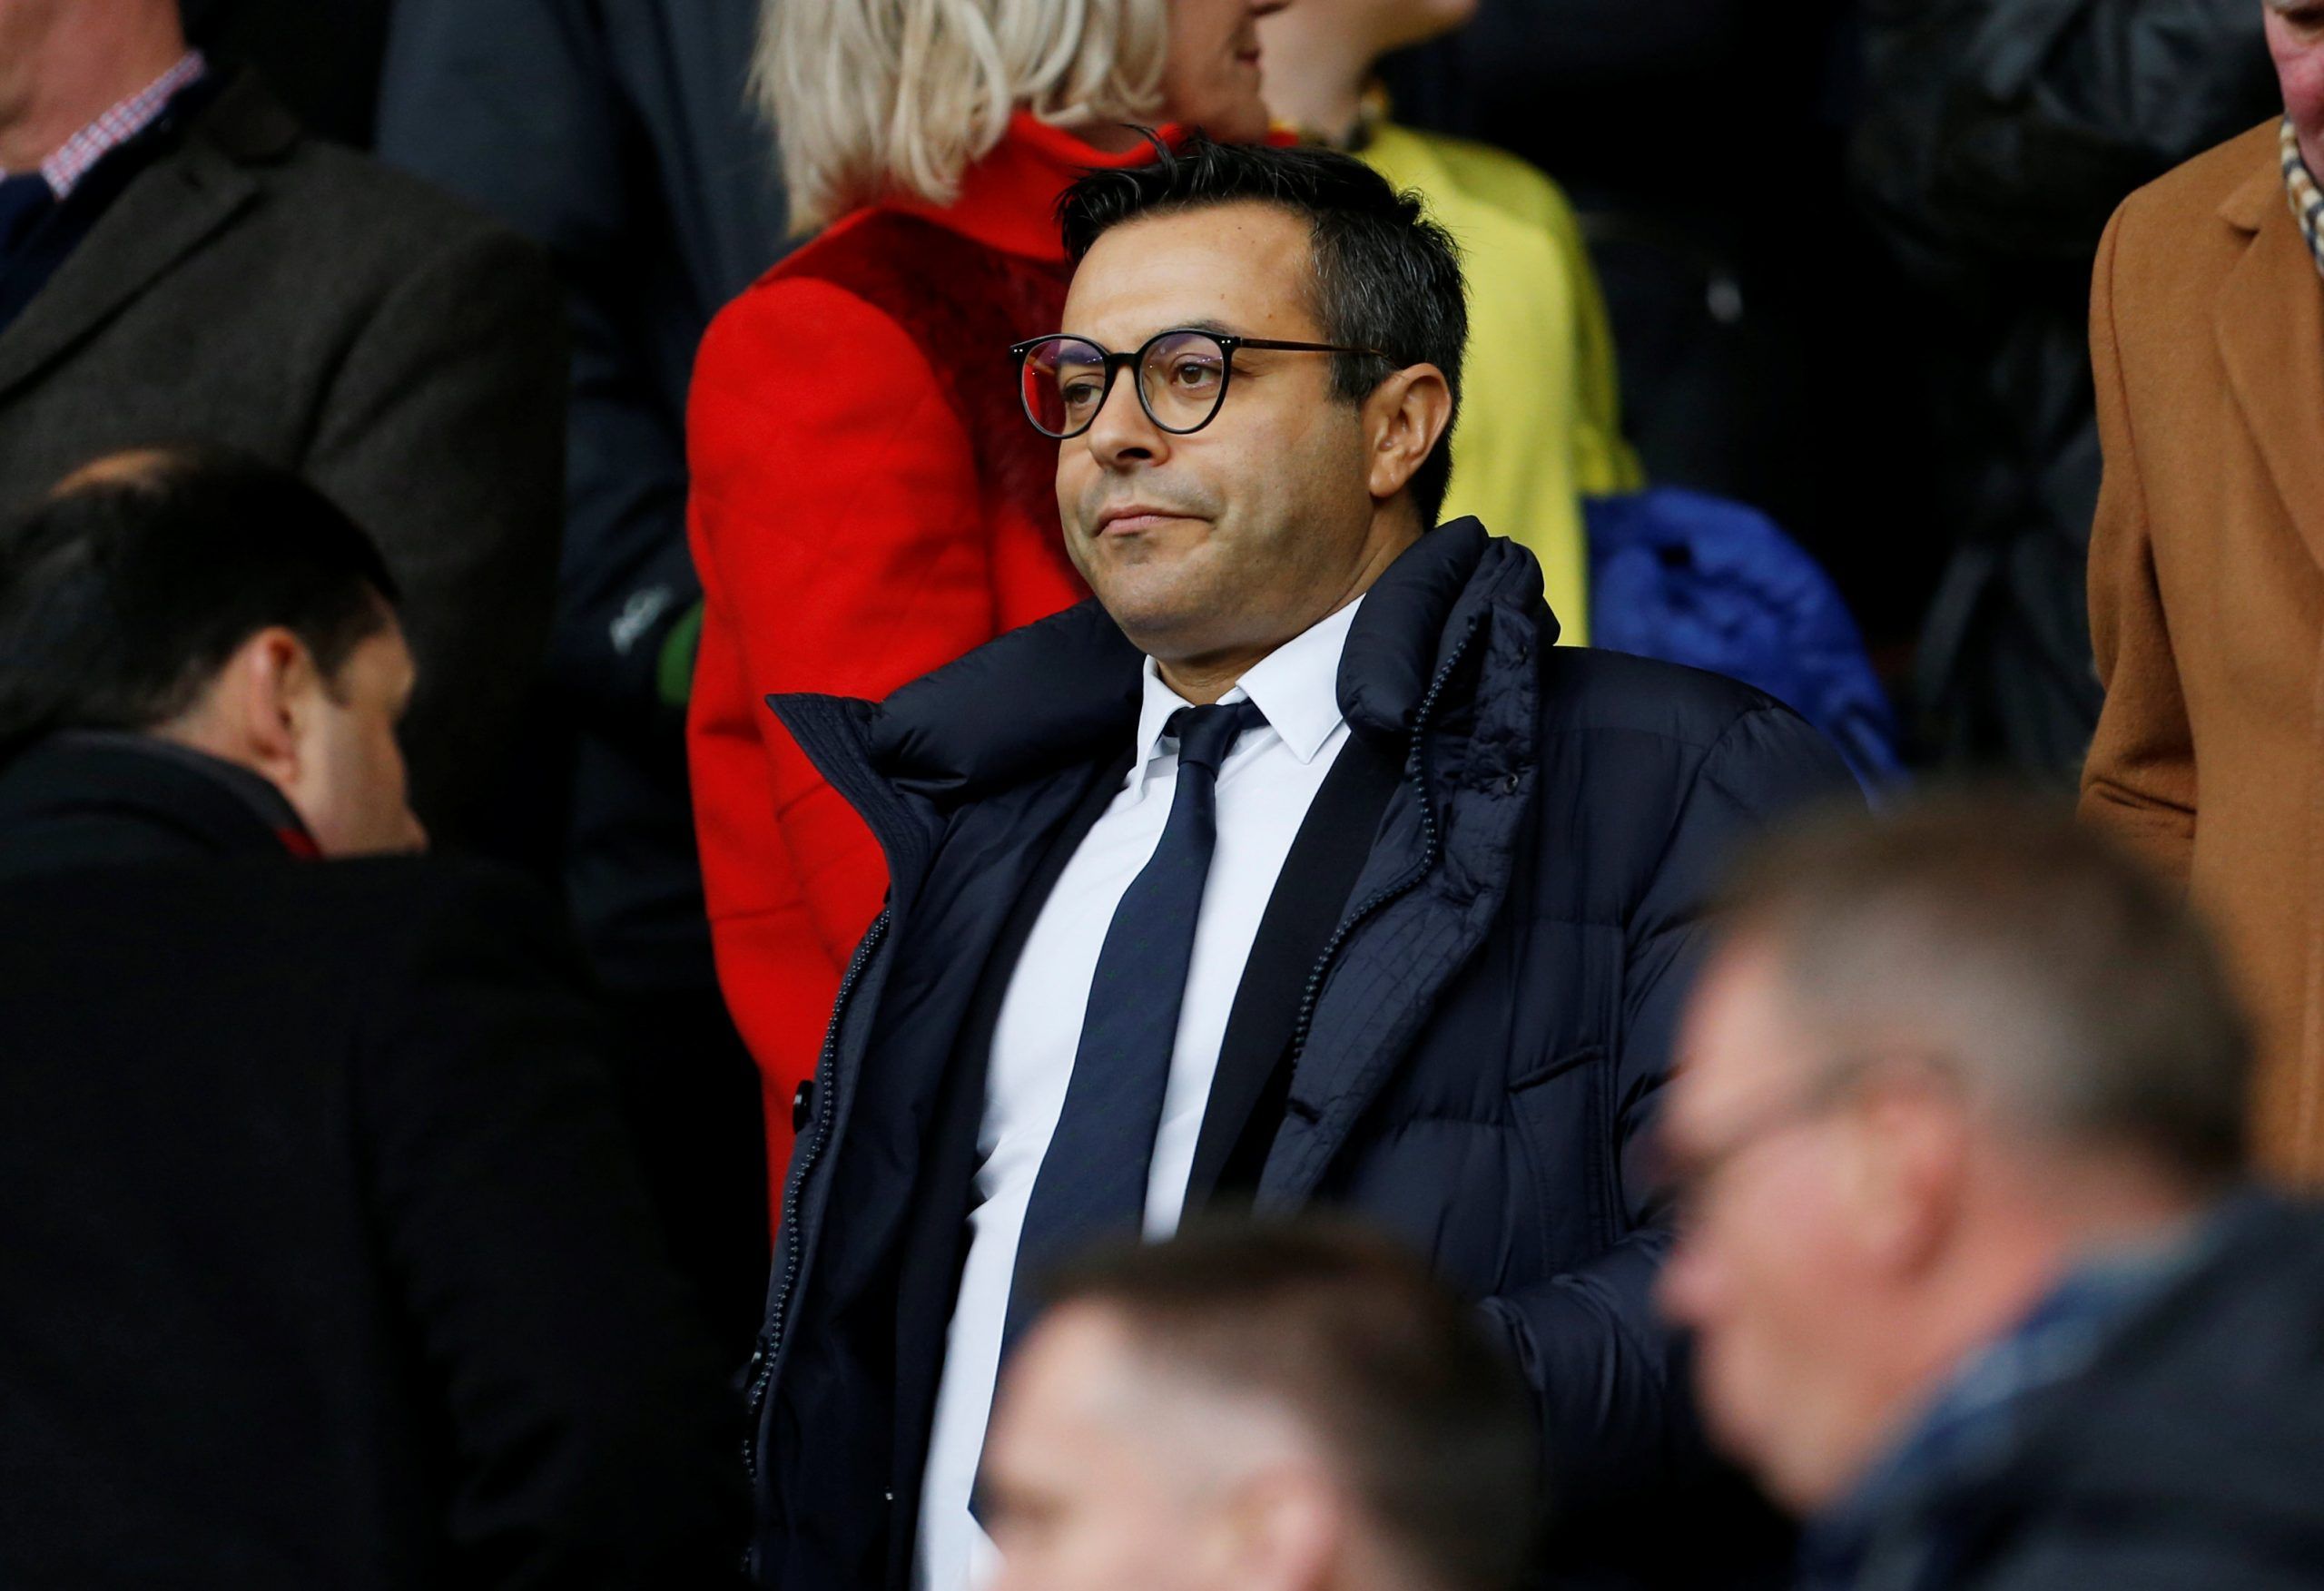 Soccer Football - Championship - Sheffield United v Leeds United - Bramall Lane, Sheffield, Britain - December 1, 2018   Leeds United chairman Andrea Radrizzani looks on from the stand   Action Images/Craig Brough    EDITORIAL USE ONLY. No use with unauthorized audio, video, data, fixture lists, club/league logos or 